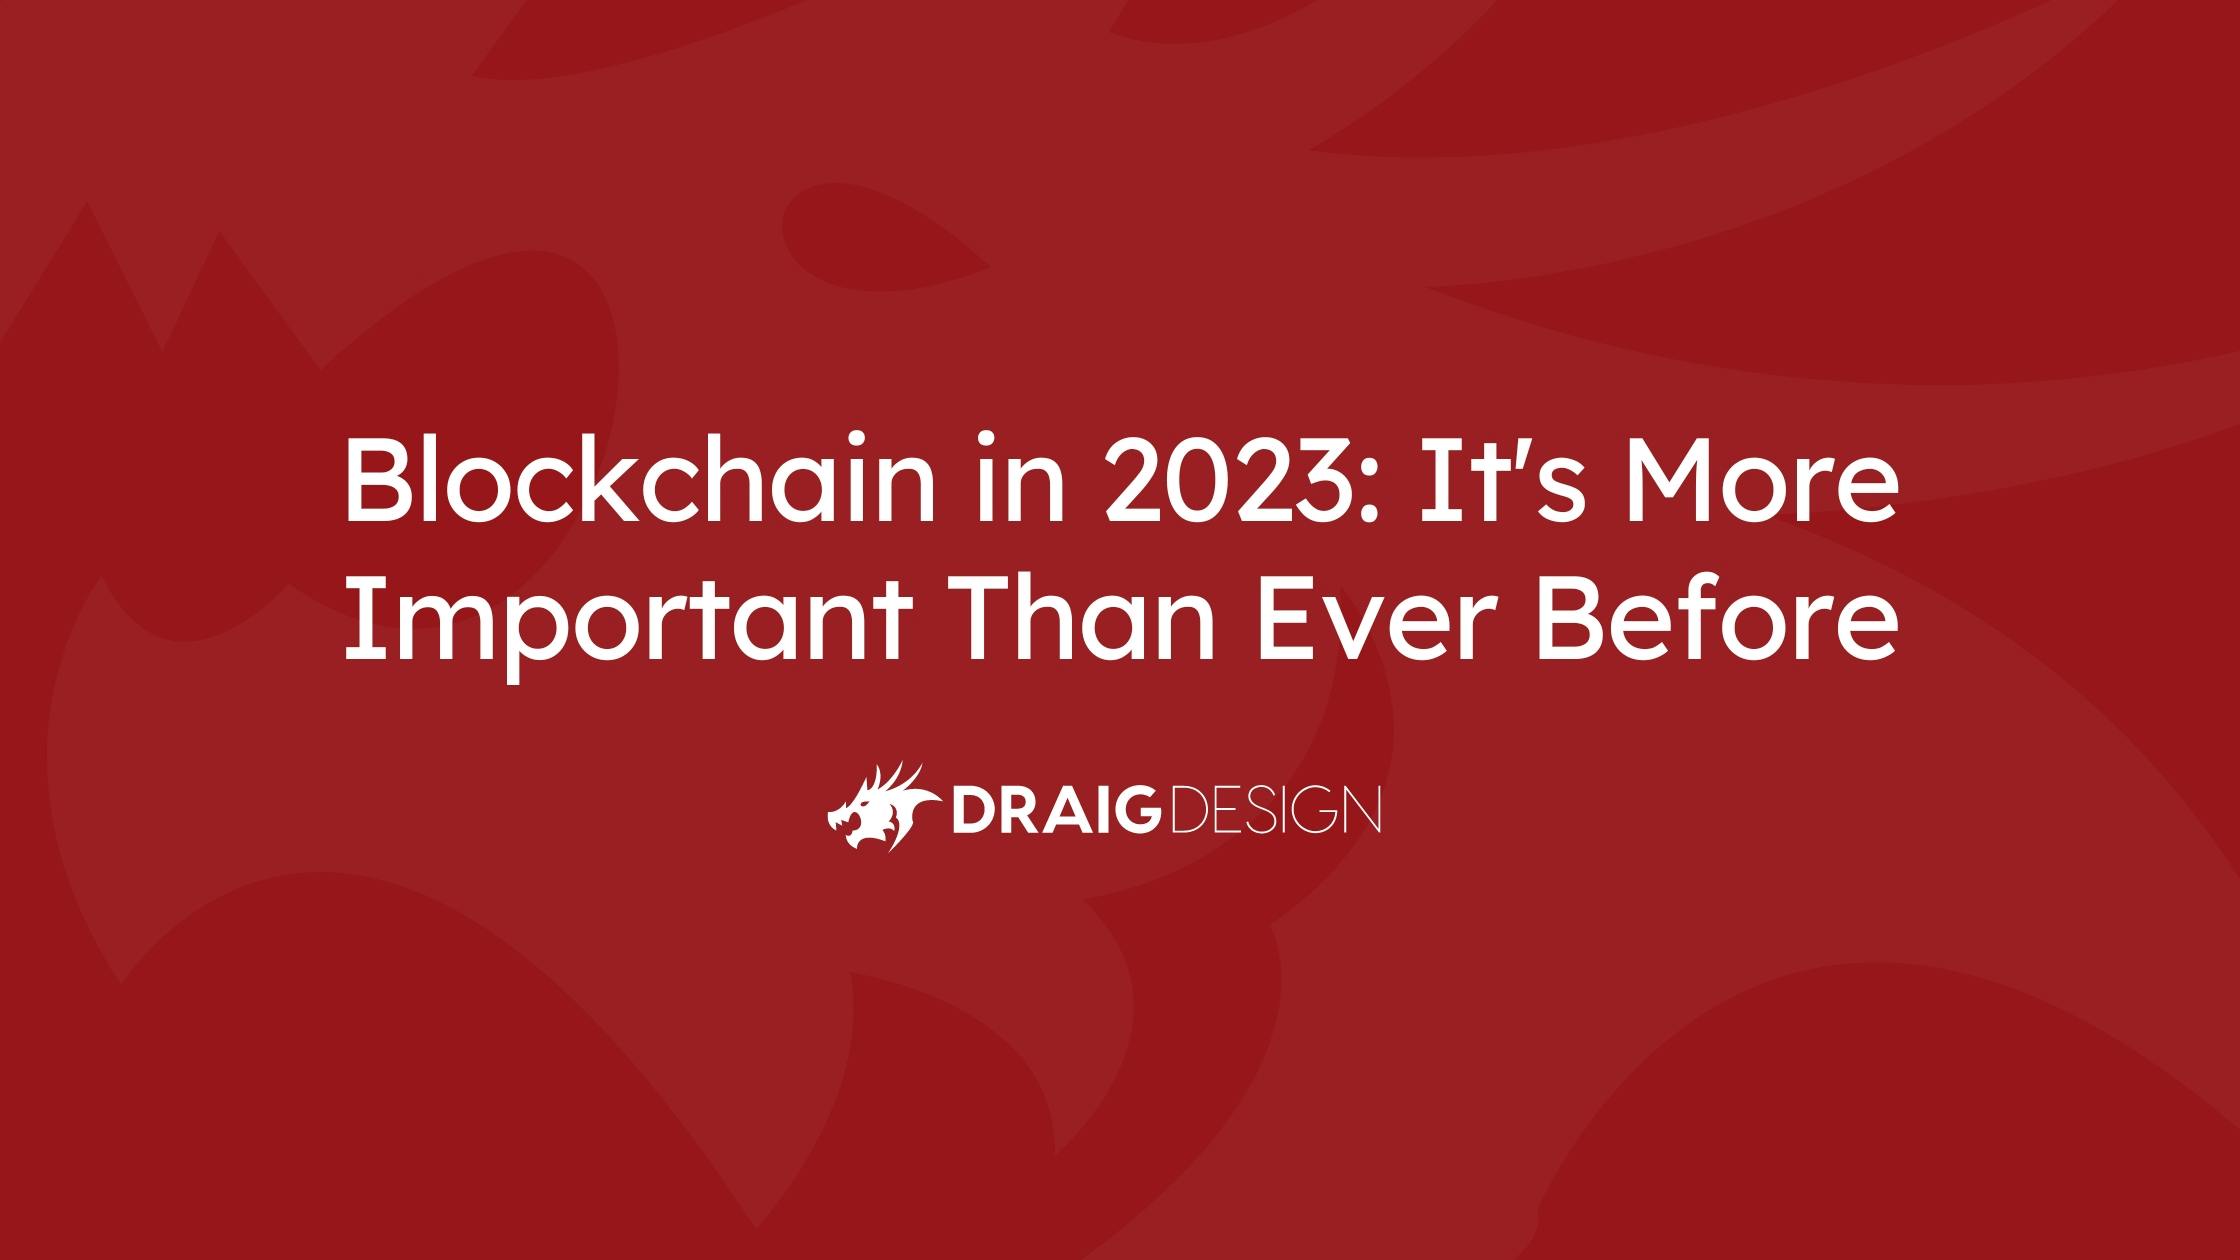 Blockchain in 2023: It's More Important Than Ever Before